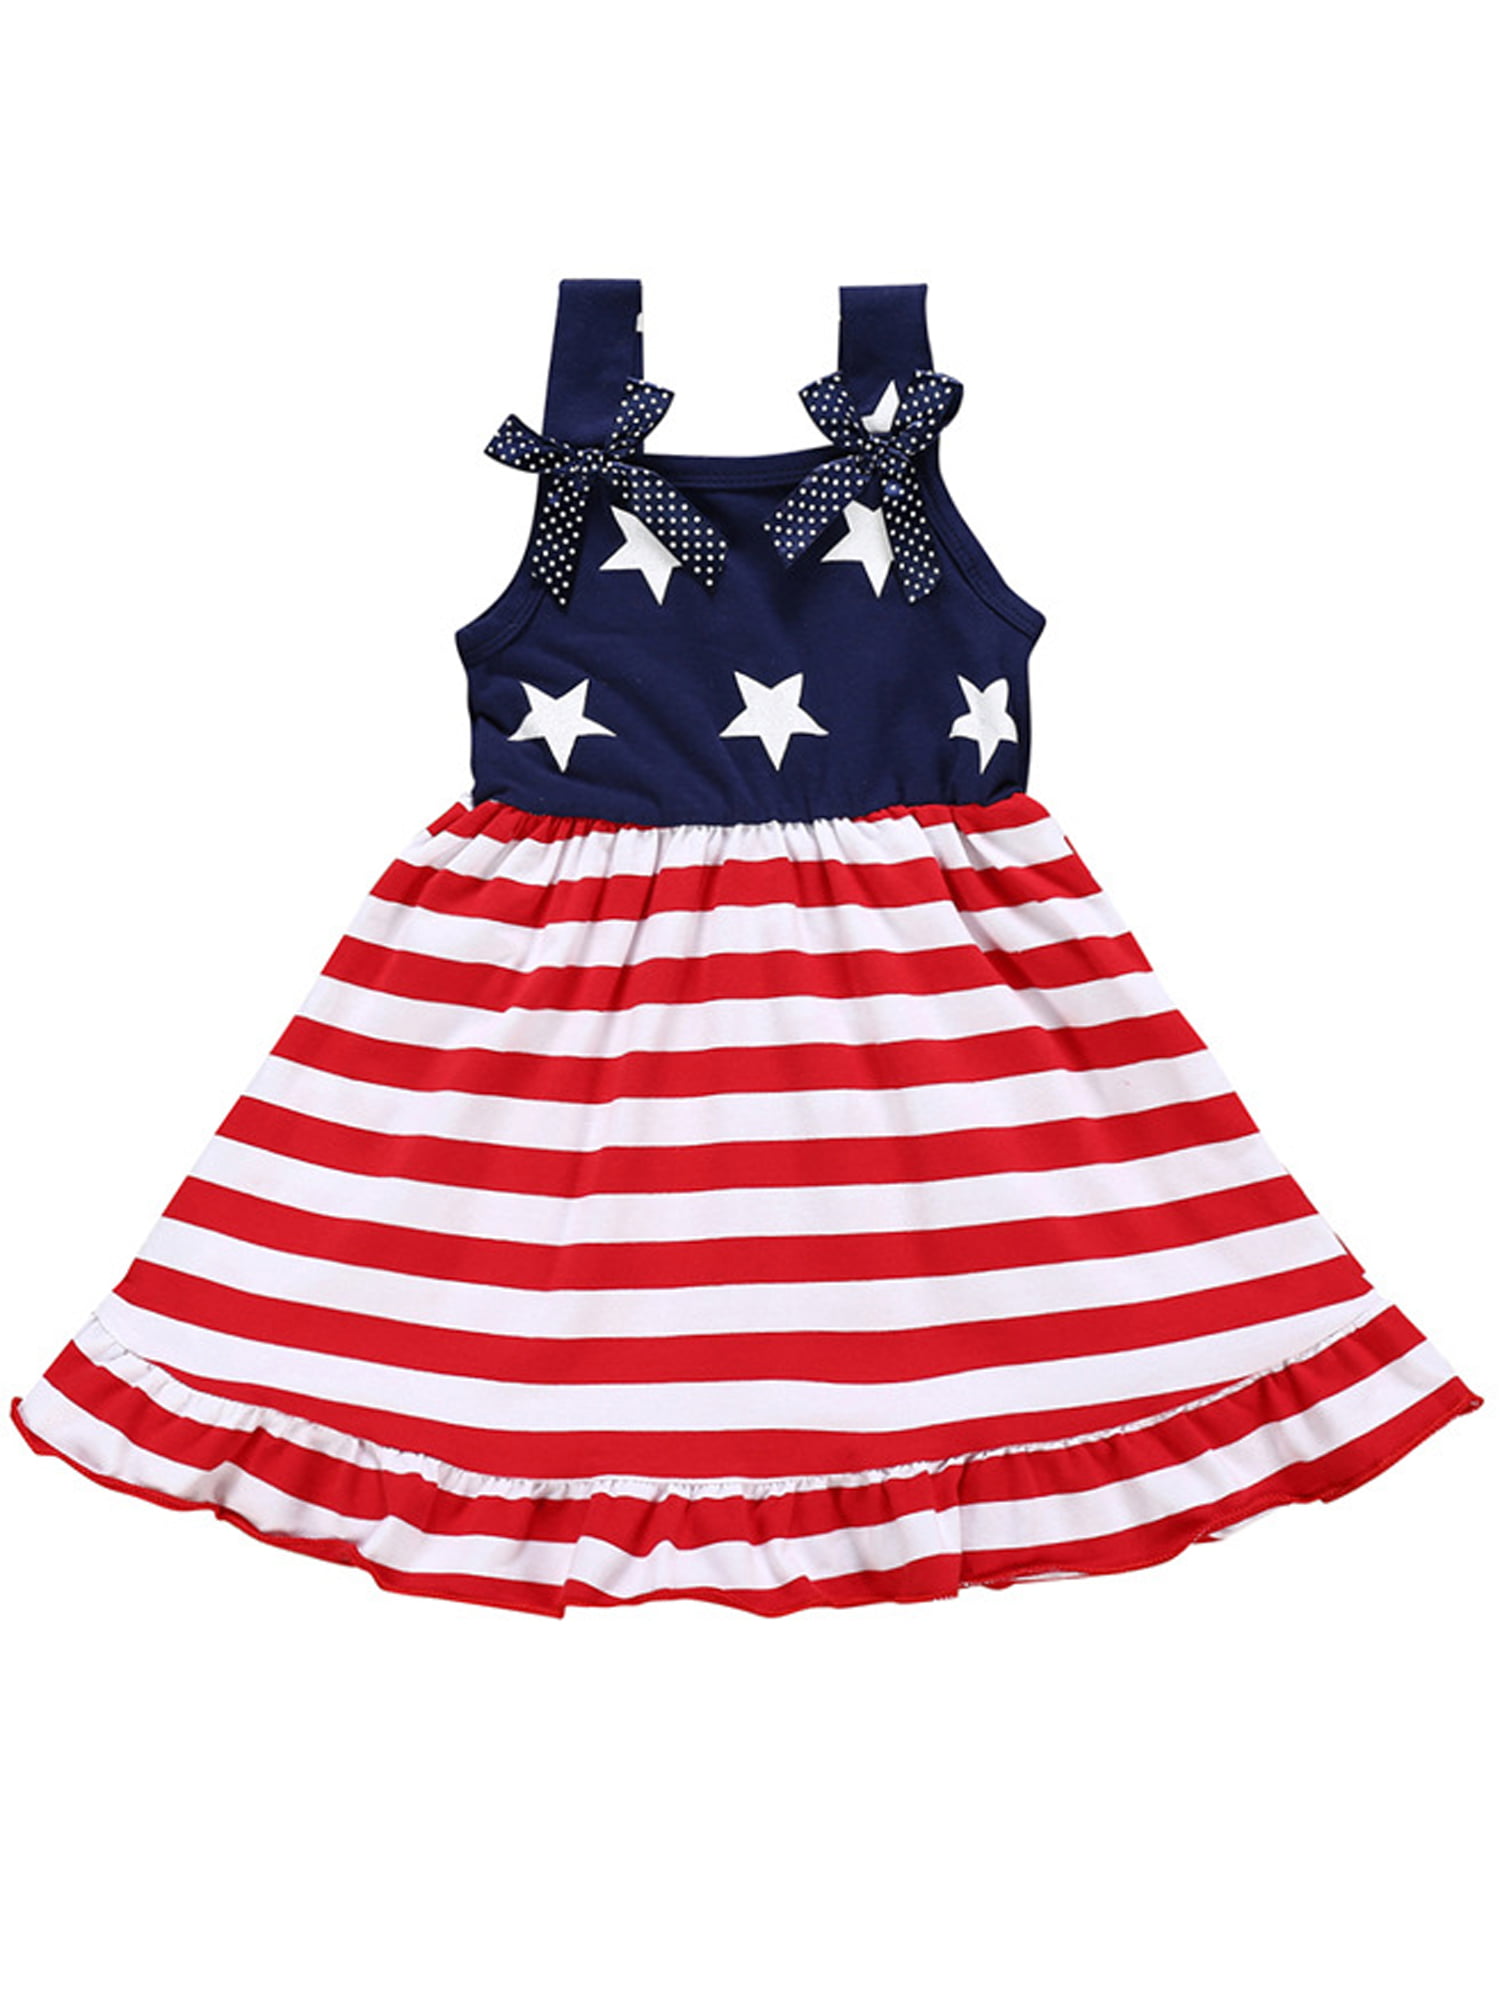 Baby Girl Clothes Striped Bowknot Summer Sundress Cotton Pocket Outfits 2-6T